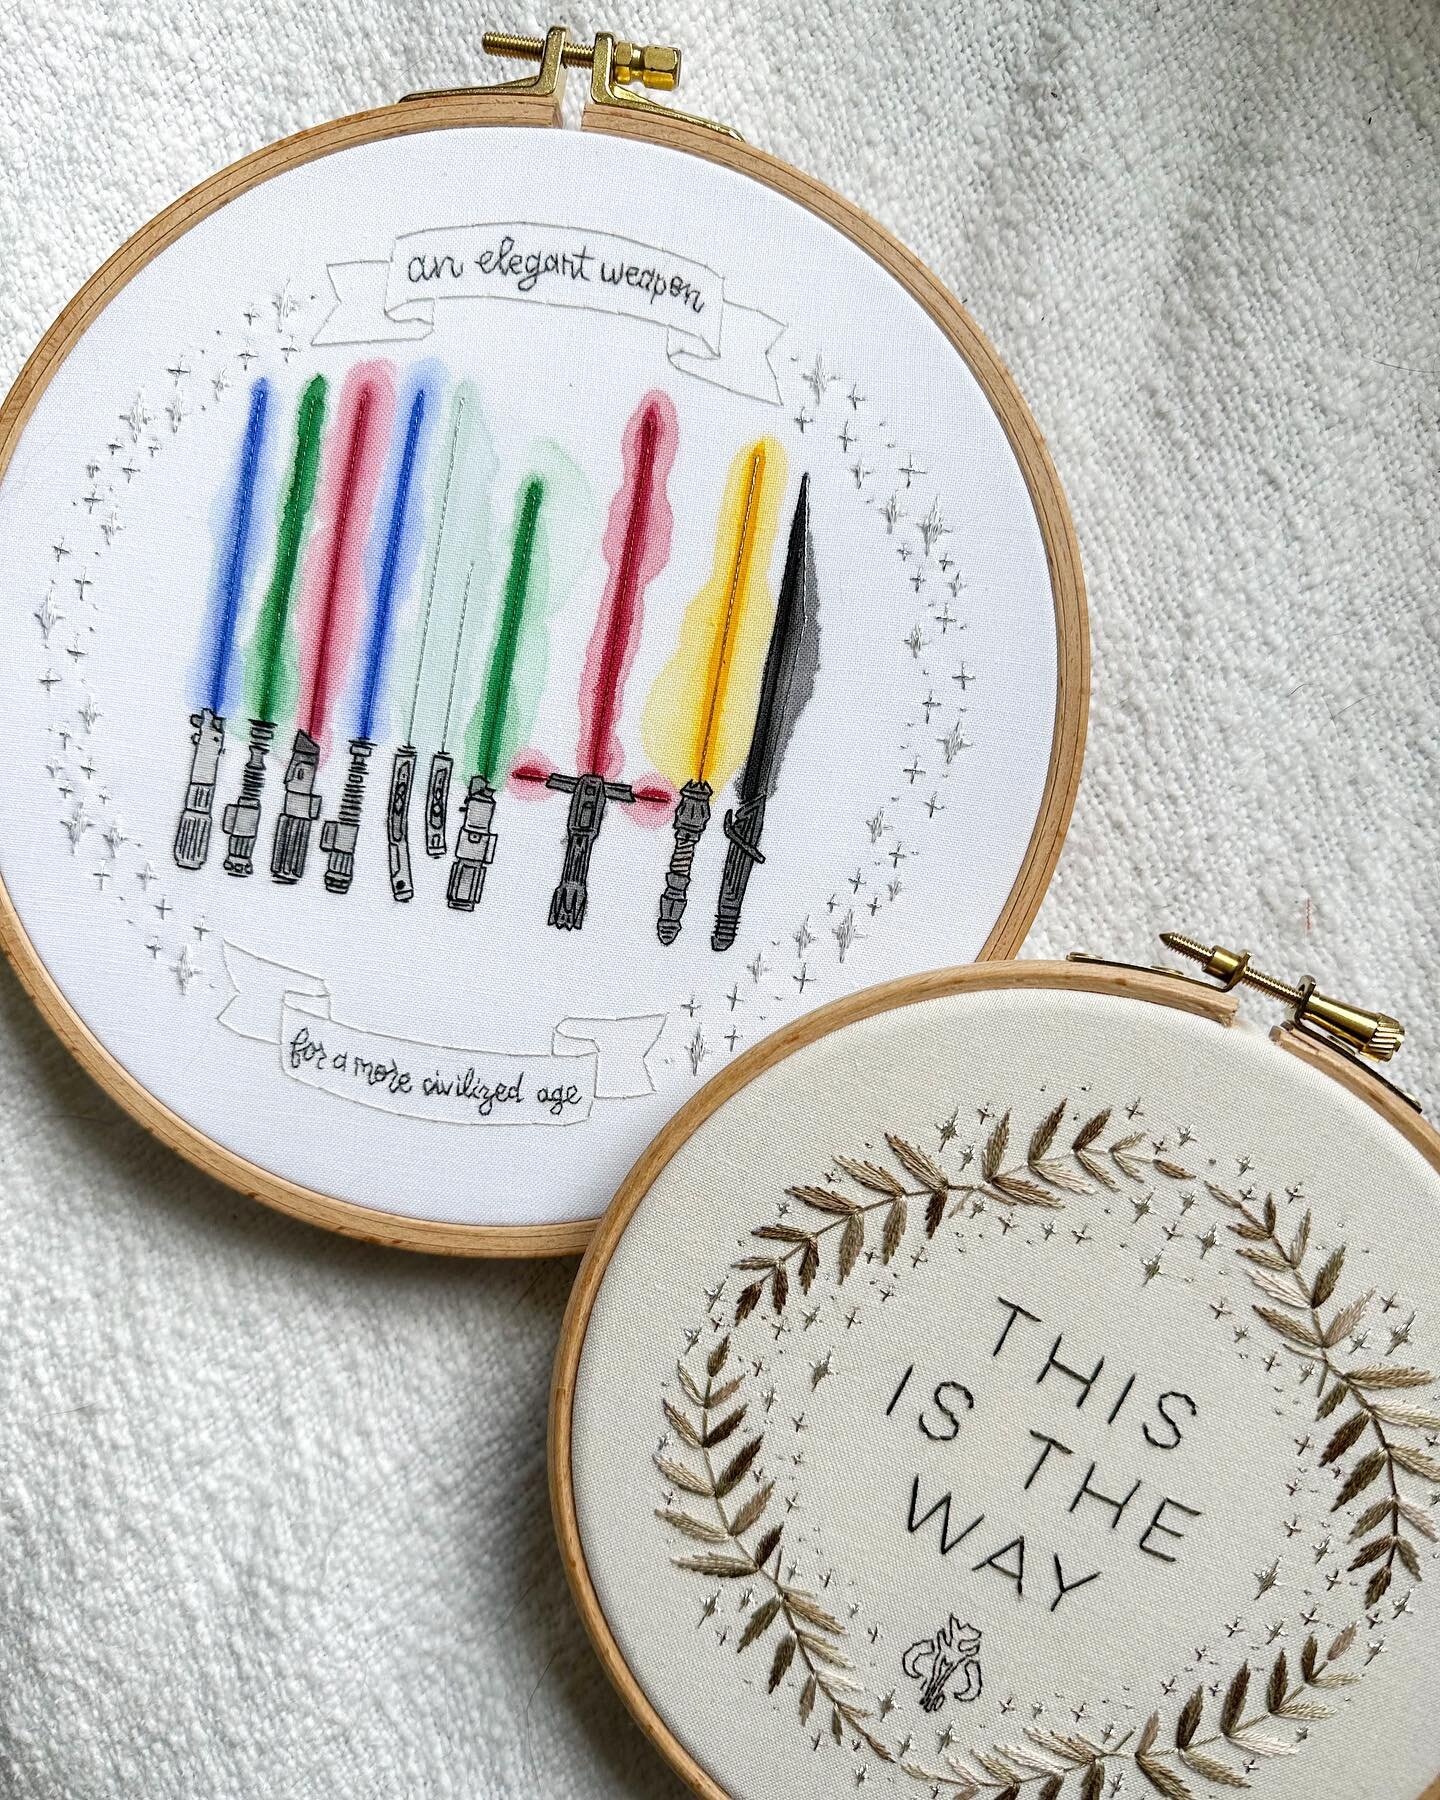 ✨ May the Fourth be with you ✨

Just finished stitching the hoops for this month&rsquo;s Patrons, and yes, they&rsquo;re Star Wars themed! I had to feature the stories from a galaxy far far away this month, and I am absolutely in love with how these 